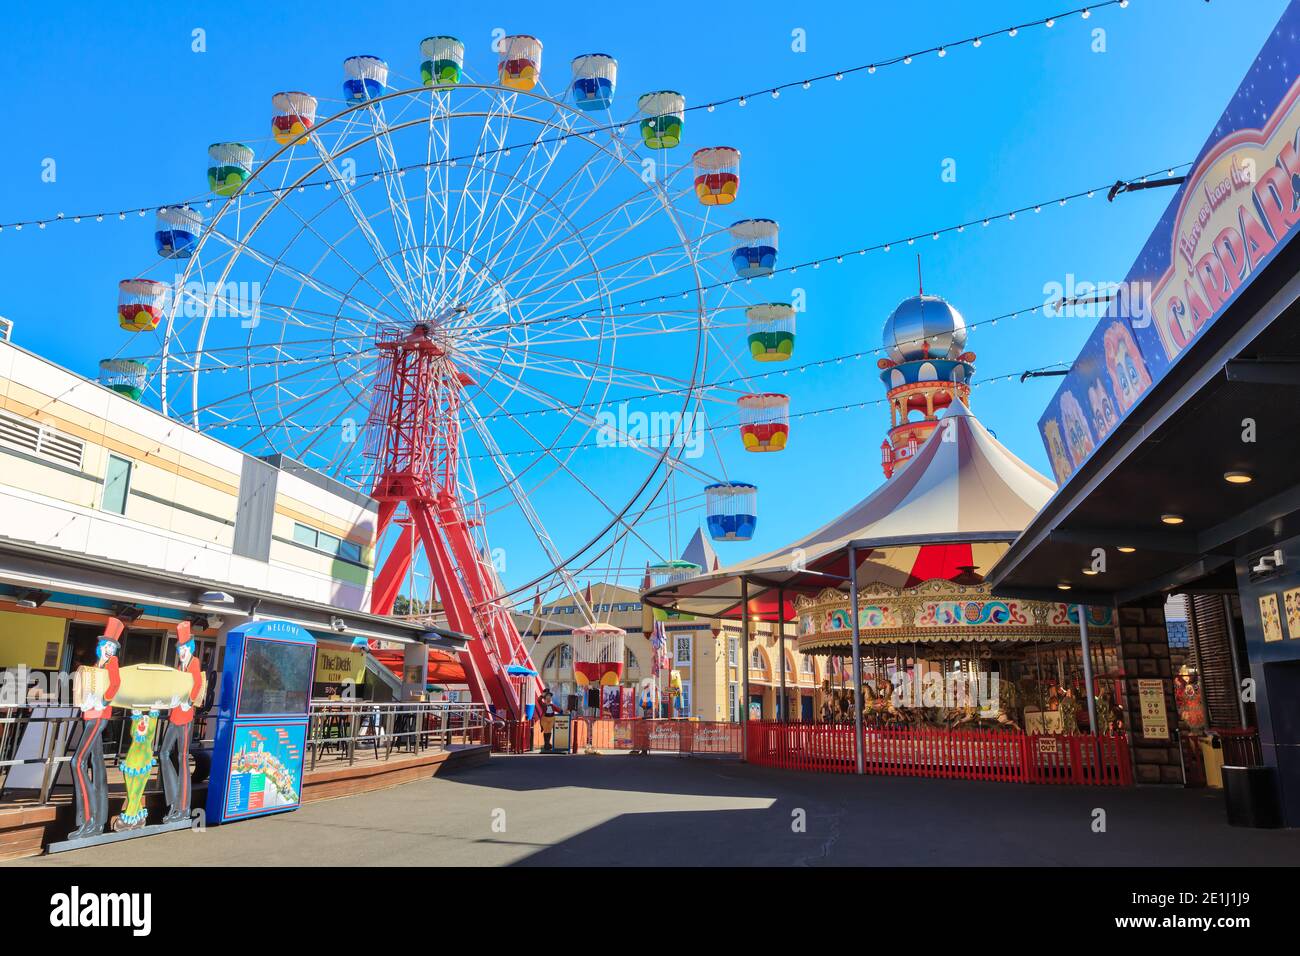 The giant Ferris wheel and other attractions at Luna Park, an amusement park in Sydney, Australia Stock Photo